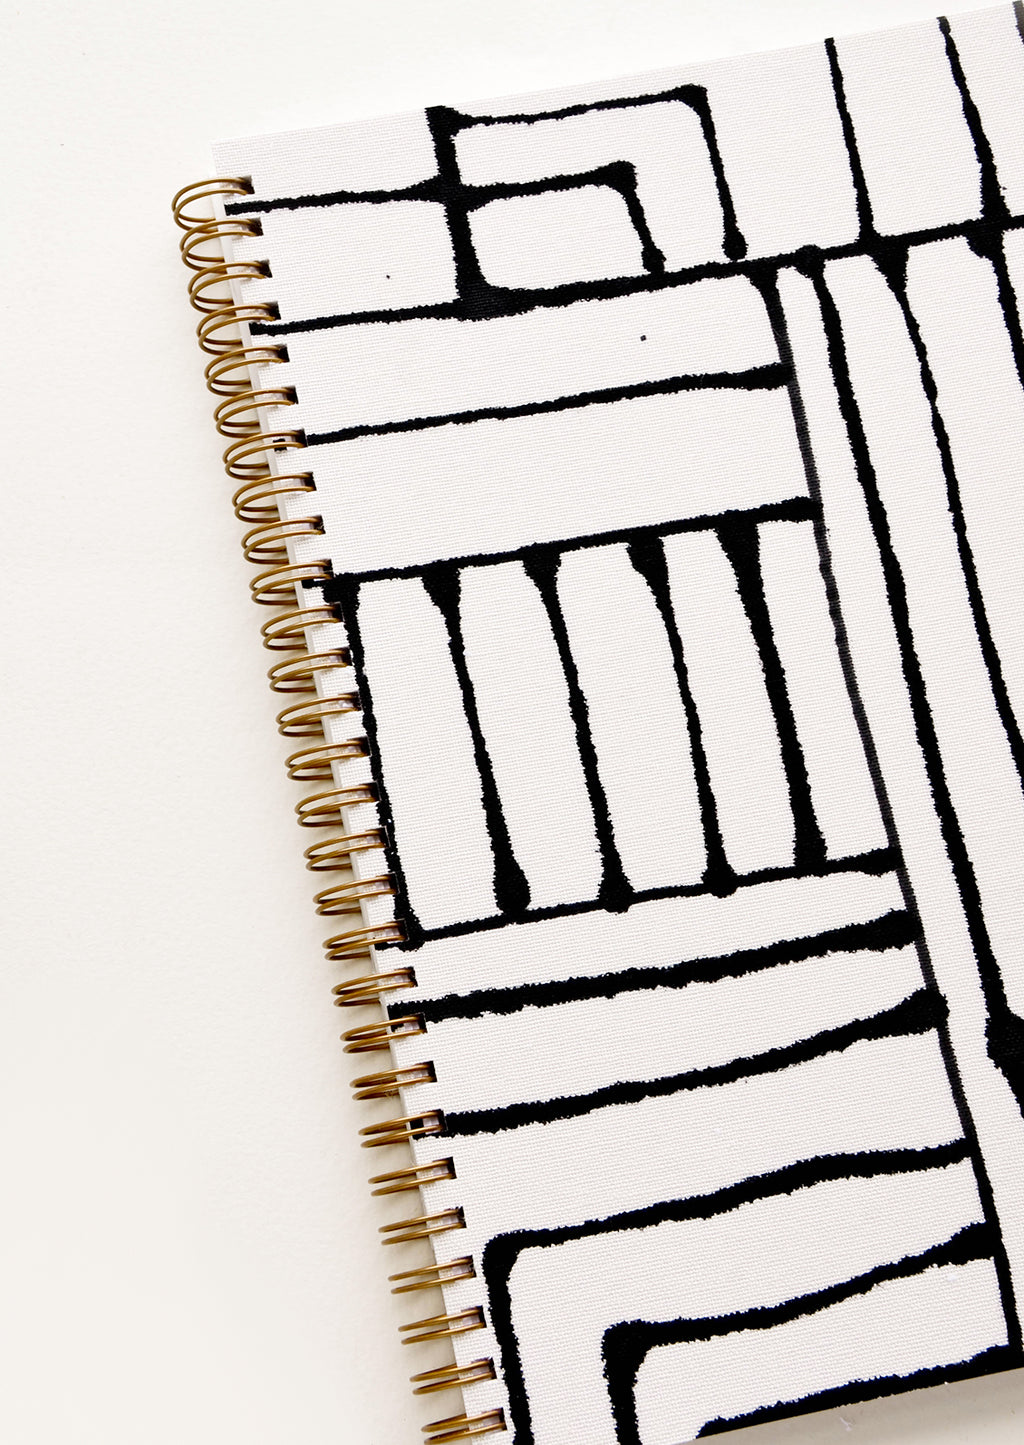 2: Notebook with cloth-textured cover with hand painted black and white line pattern